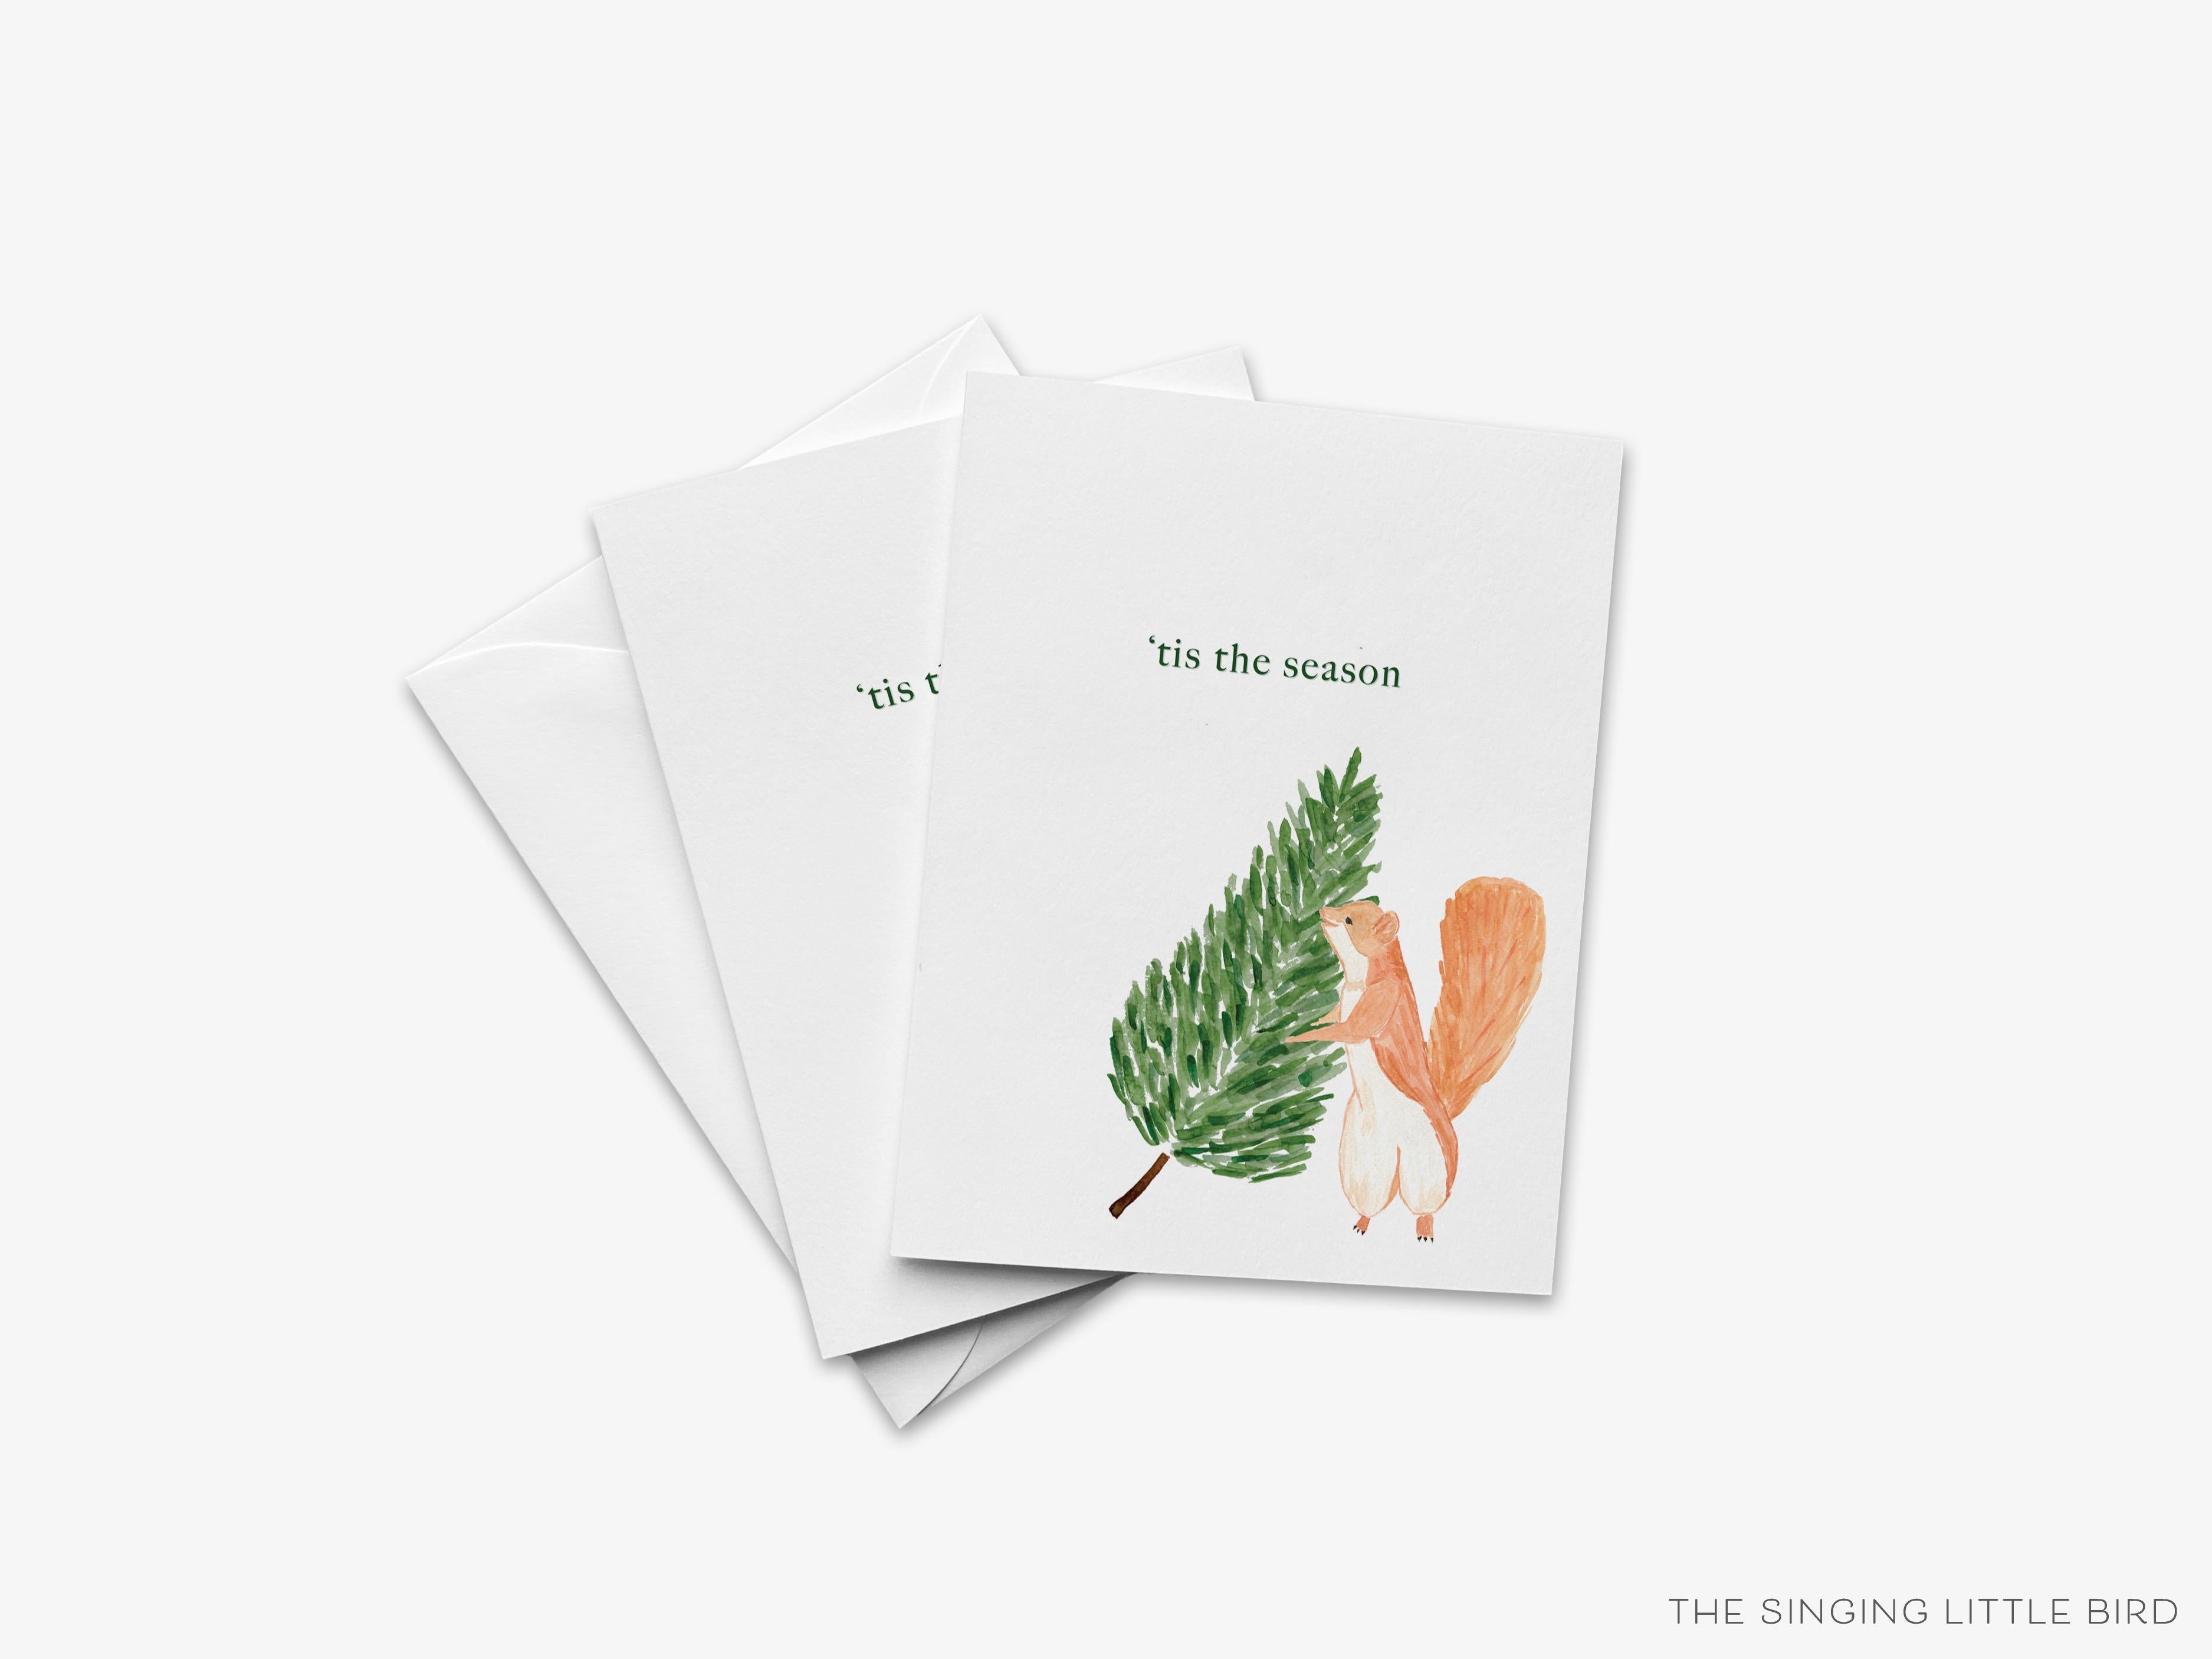 Tis The Season Squirrel Christmas Greeting Card-These folded greeting cards are 4.25x5.5 and feature our hand-painted evergreen tree and squirrel, printed in the USA on 100lb textured stock. They come with a White envelope and make a great Christmas card for the tree and animal lover in your life.-The Singing Little Bird